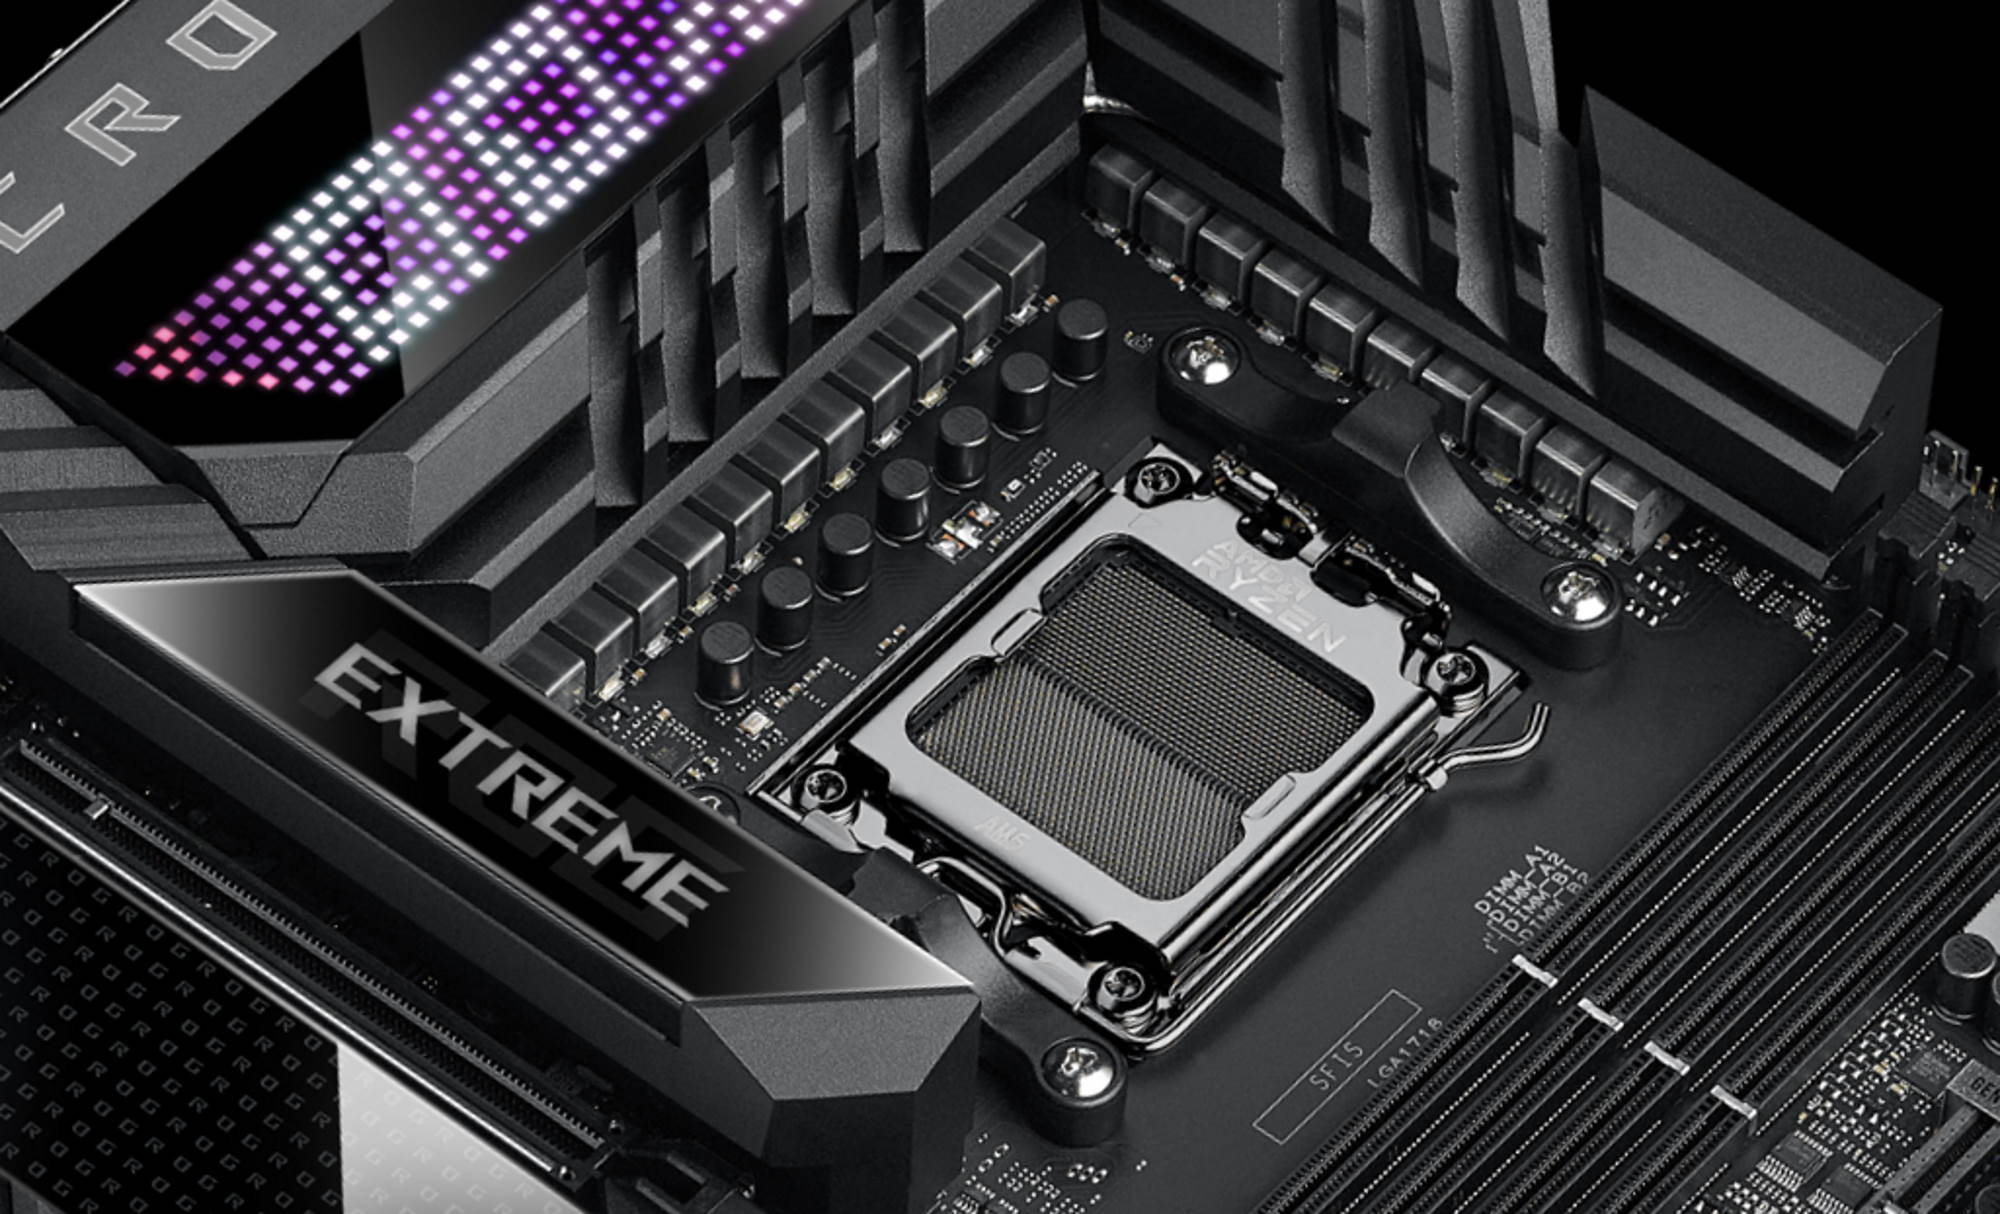 AM5 kicks off in style with ROG Crosshair and ROG Strix X670 motherboards